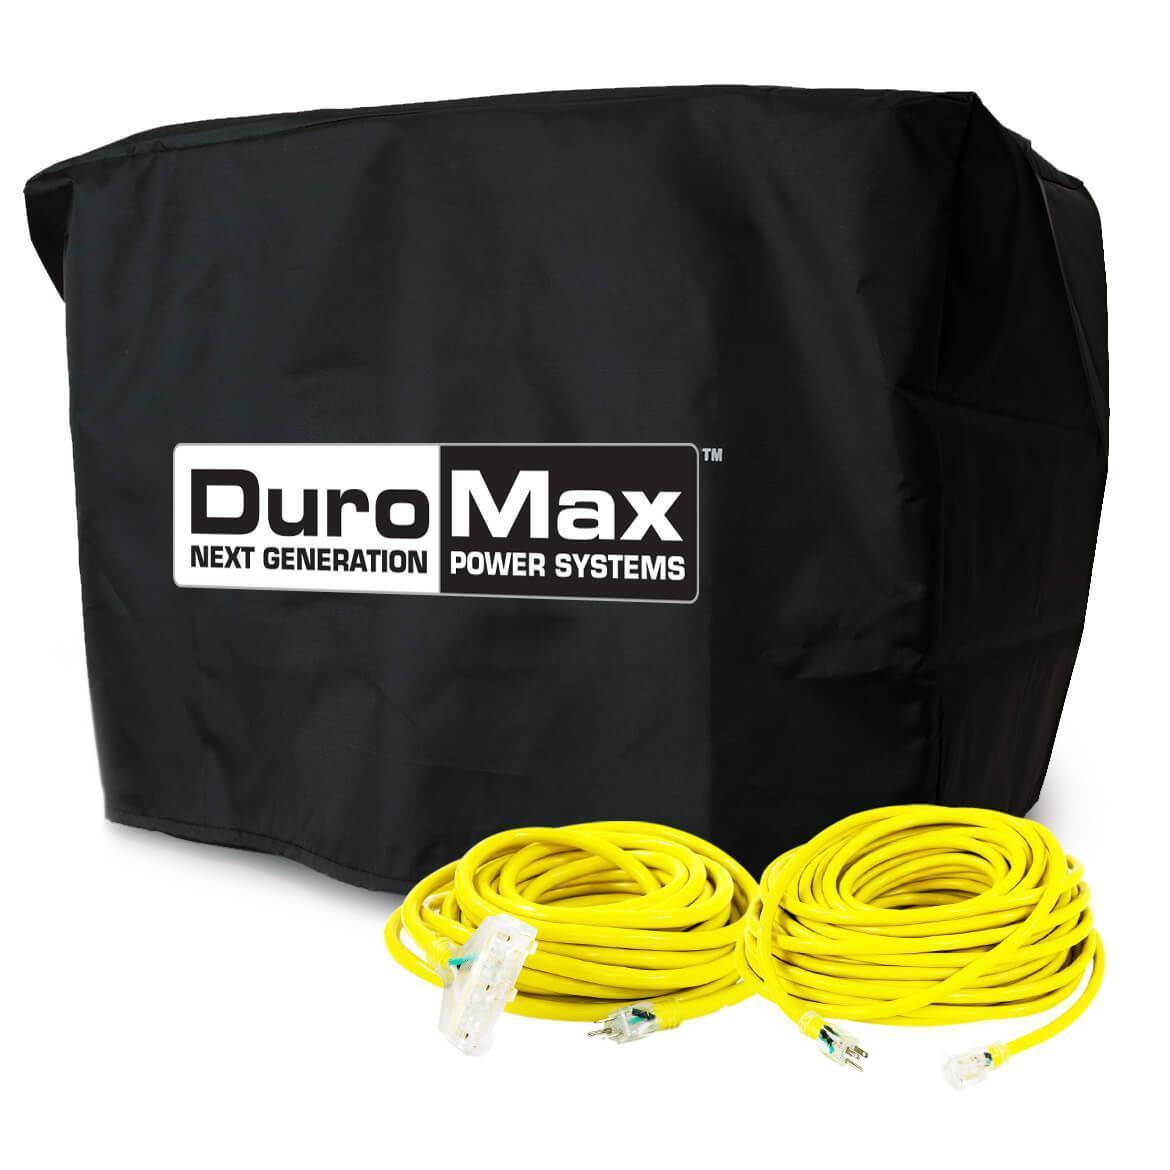 DuroMax, DuroMax Large Generator Cords and Cover Starter Kit (Fits 8,500 Watt Units and Up)